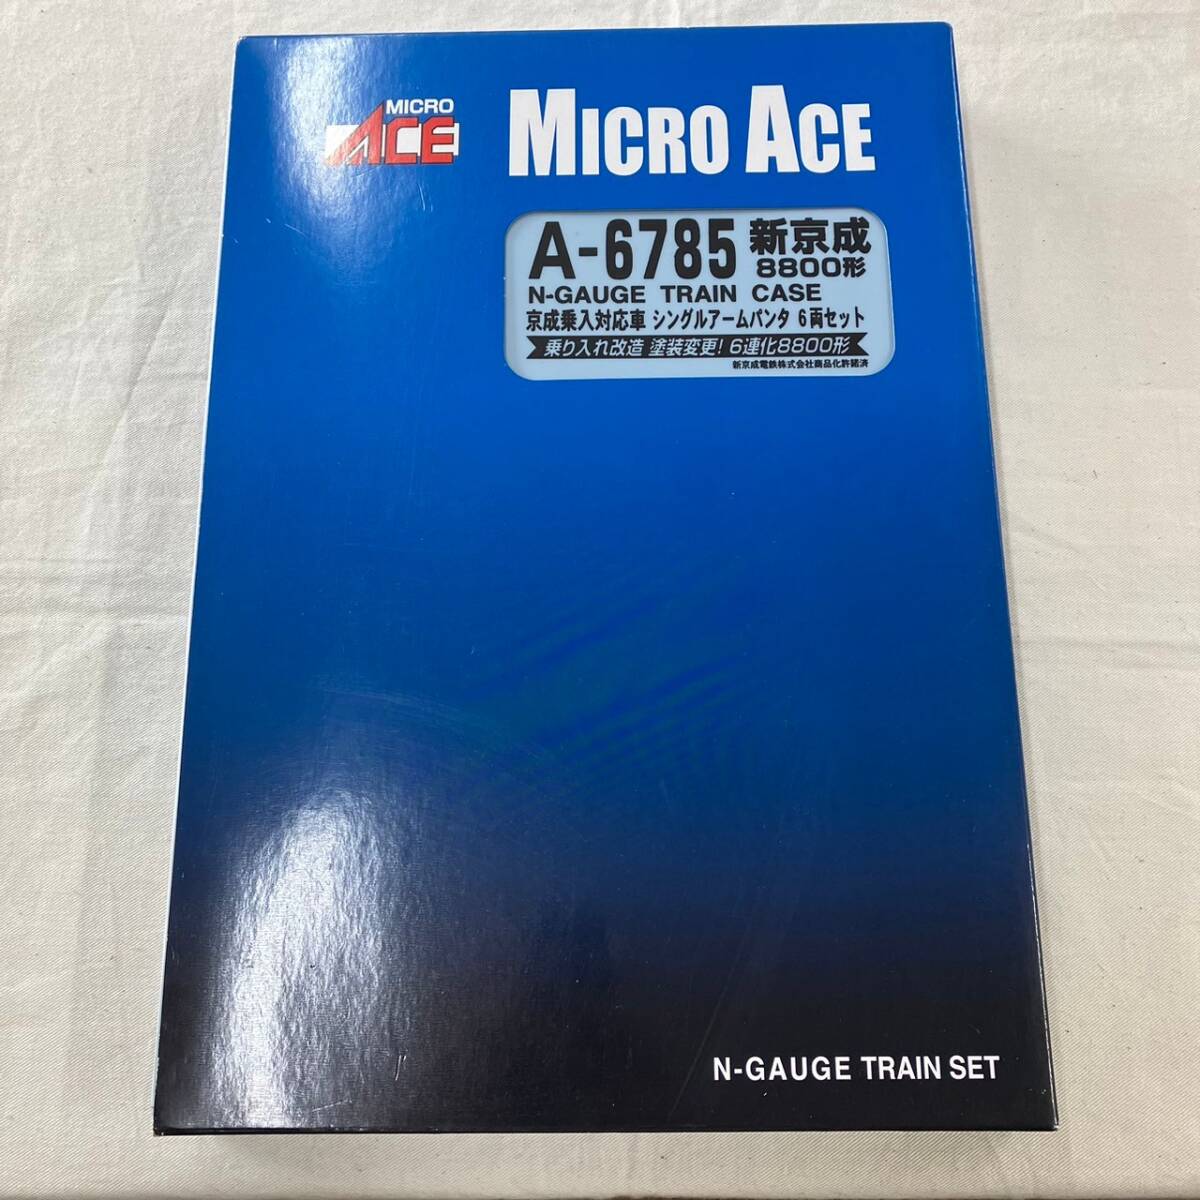 4816-3K　MICRO ACE マイクロエース　A-6785 新京成8800形 京成乗入対応車 シングルアームパンタ 6両セット　鉄道模型　Nゲージ_画像1